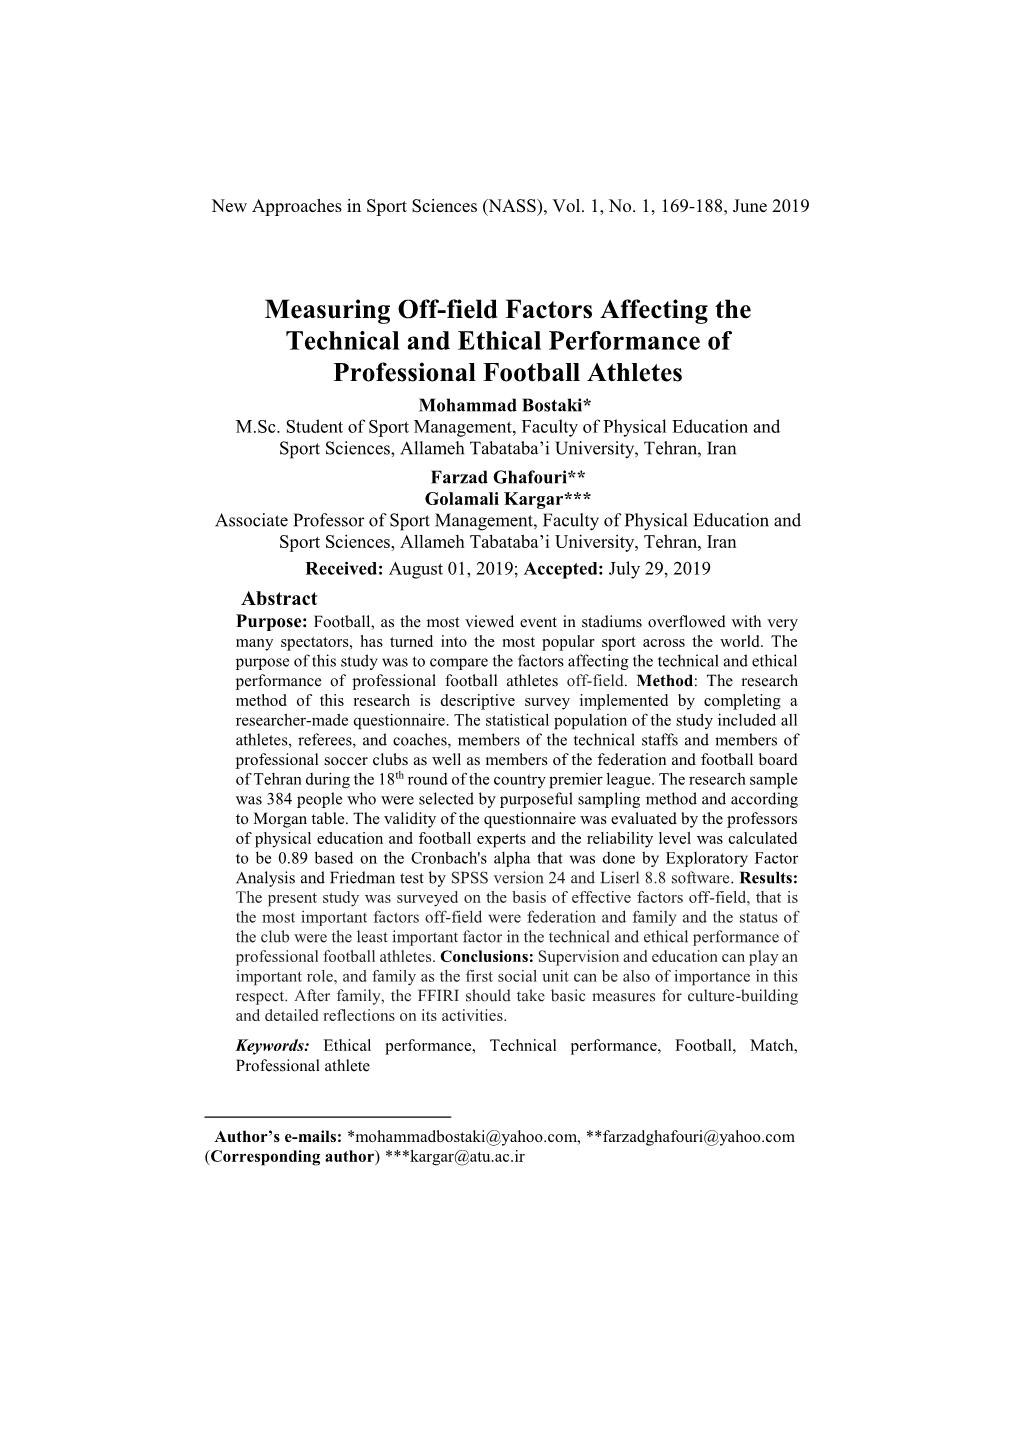 Measuring Off-Field Factors Affecting the Technical and Ethical Performance of Professional Football Athletes Mohammad Bostaki*1 M.Sc